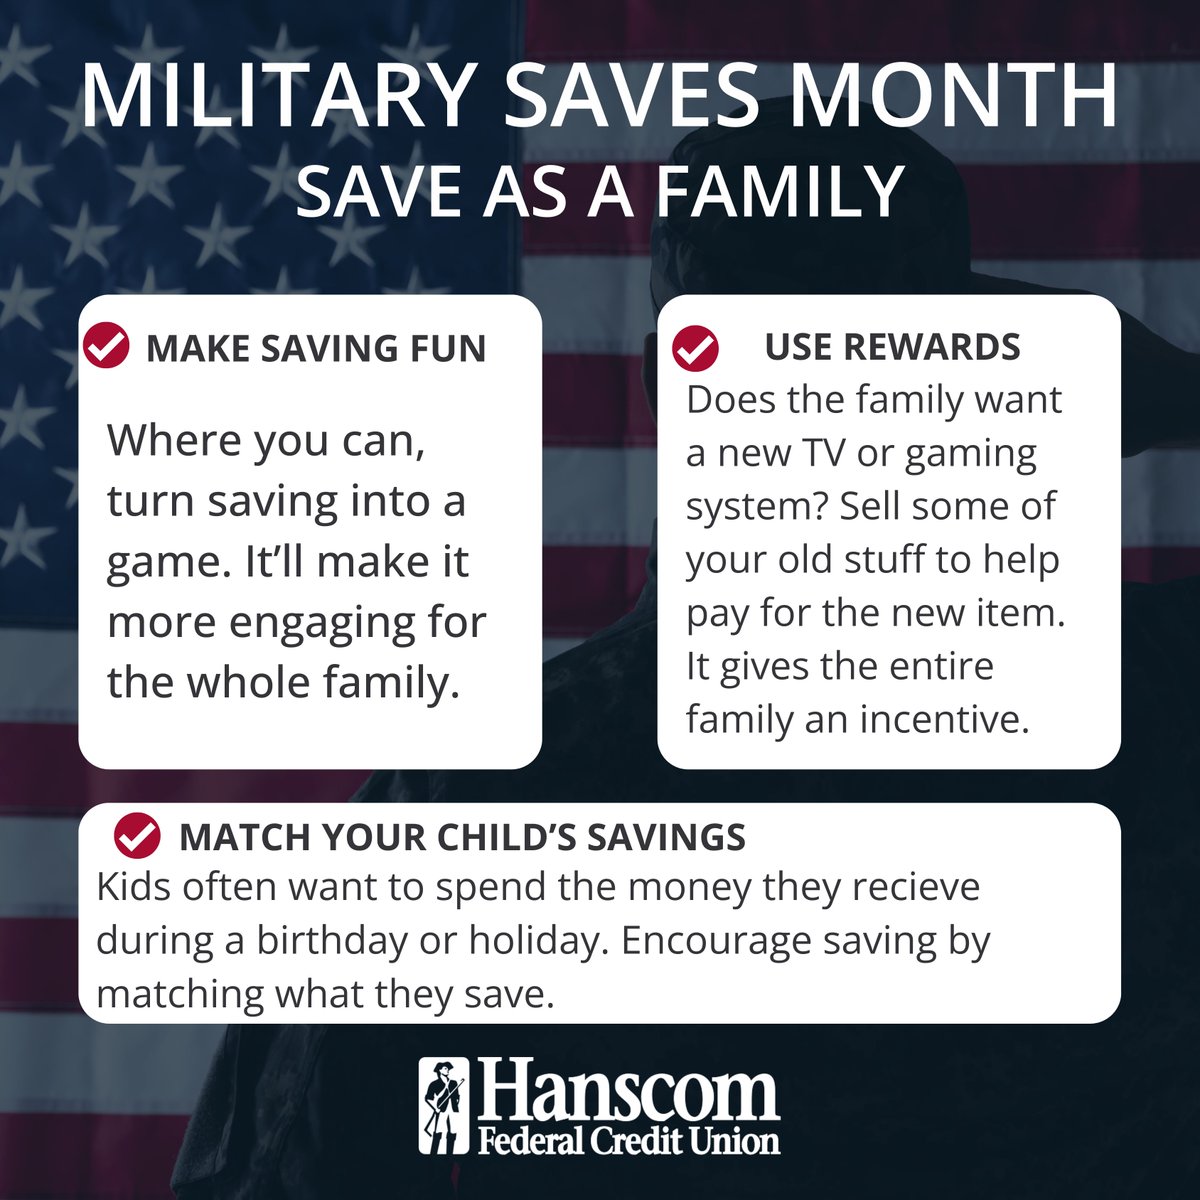 #MilitarySavesMonth is coming to an end, but the savings doesn’t have to stop. Make money a family affair by encouraging saving alongside your family. Here’s just a few examples how you can get everyone in on the financial fun. #SaveAsAFamily